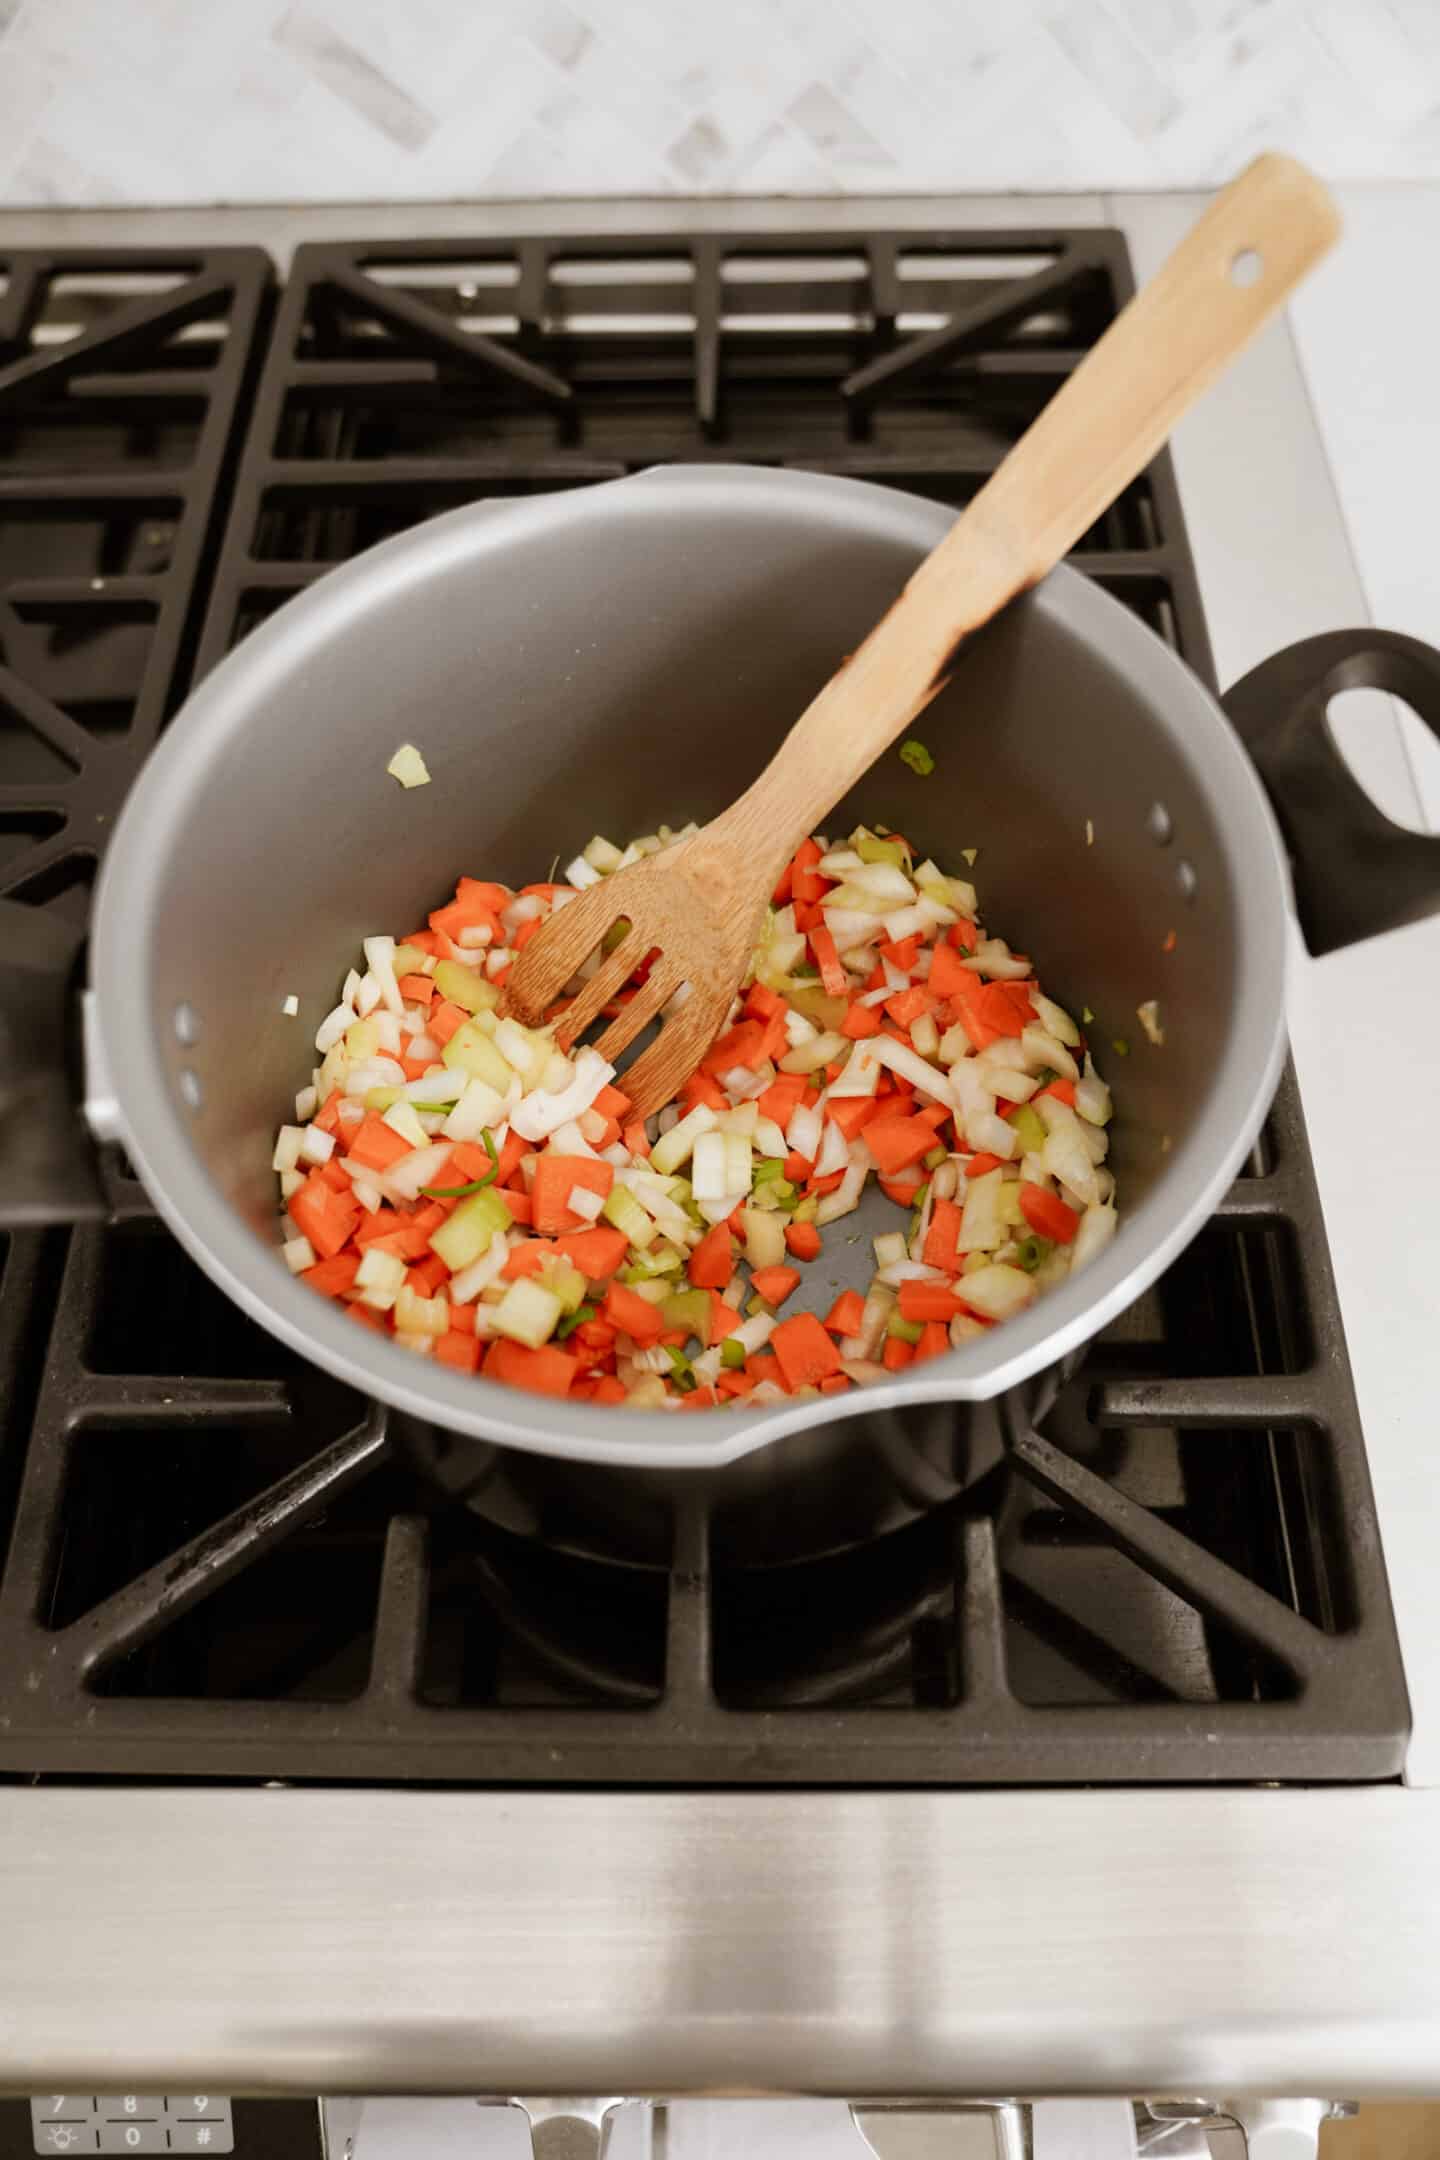 Vegetables in a pot on the stove